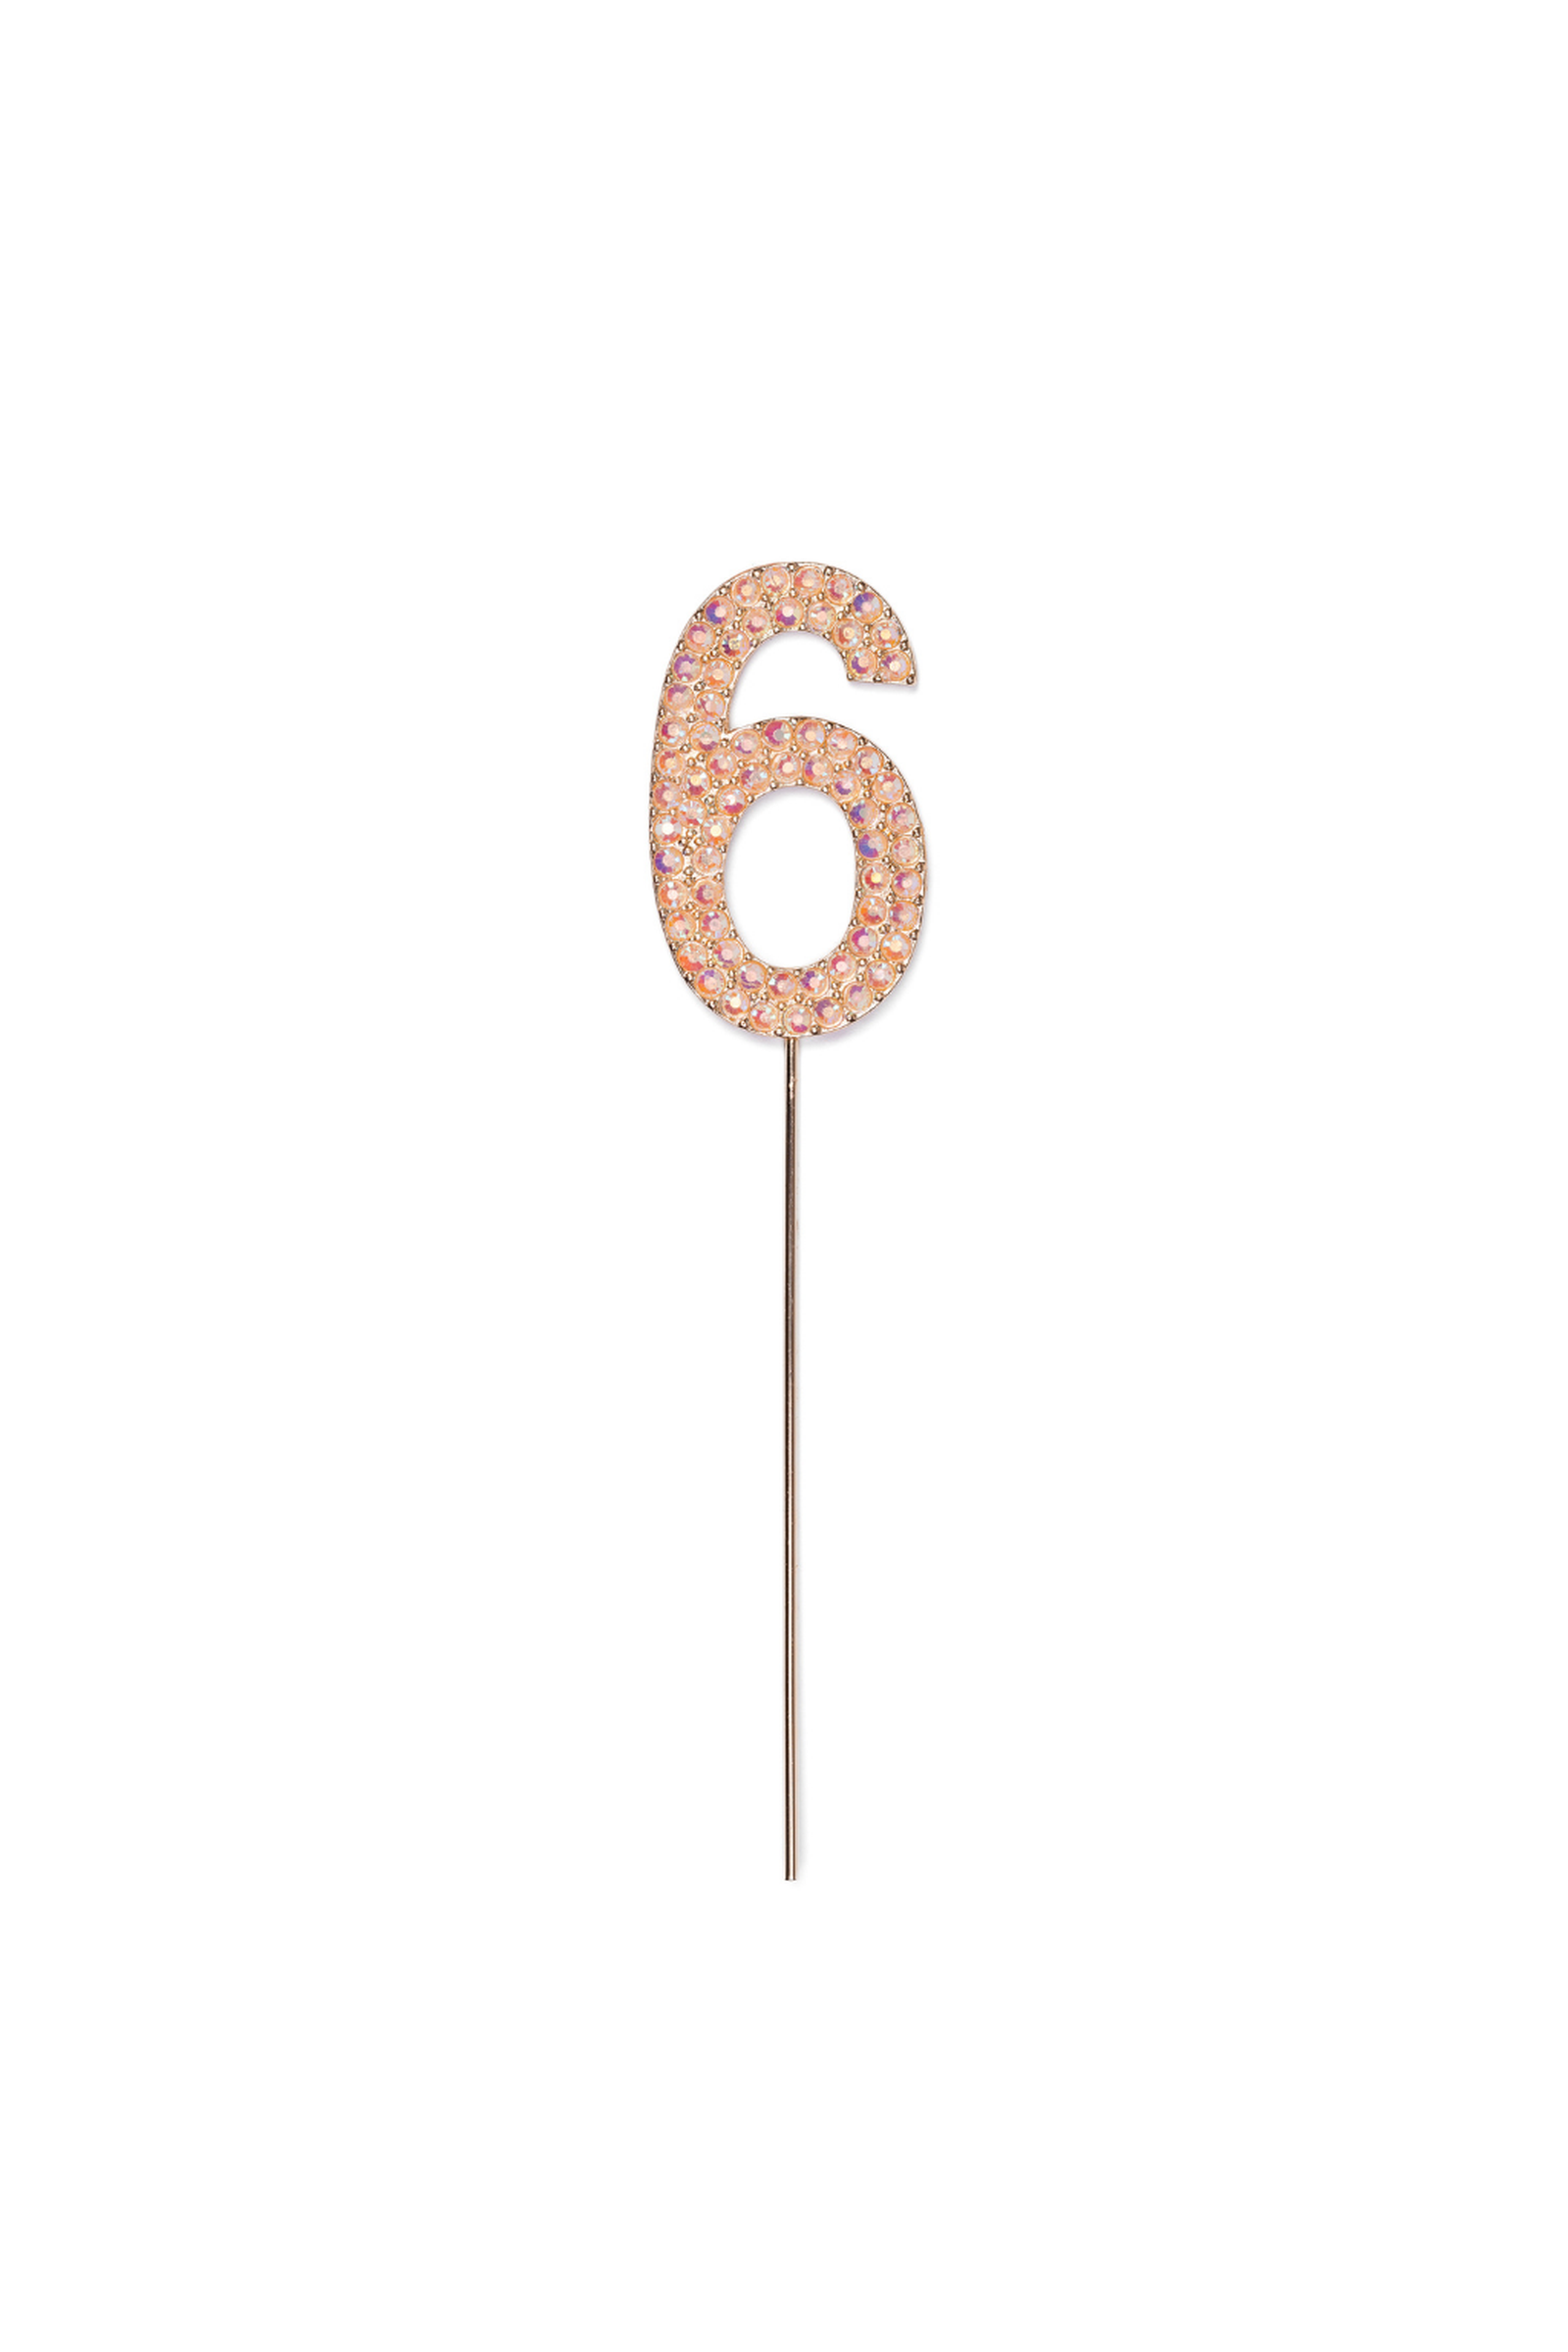 Pink Rhinestone Cake Topper Numbers - Party